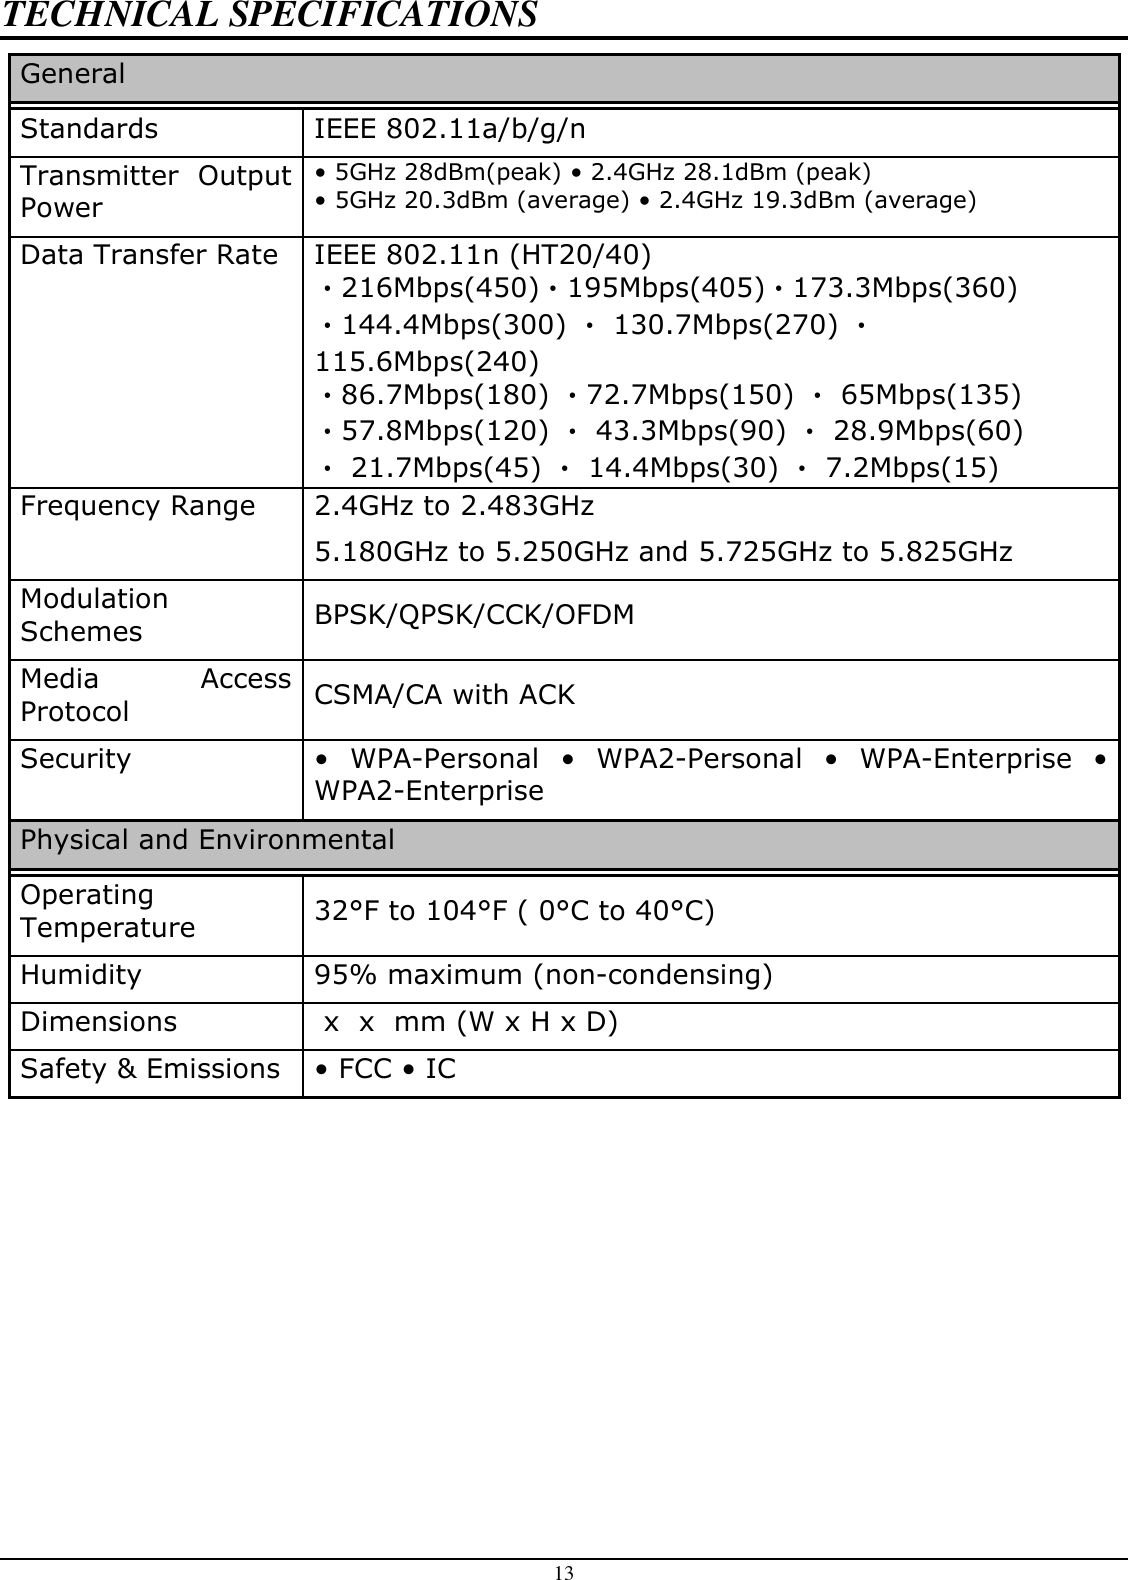 13 TECHNICAL SPECIFICATIONS General Standards IEEE 802.11a/b/g/n Transmitter  Output Power • 5GHz 28dBm(peak) • 2.4GHz 28.1dBm (peak) • 5GHz 20.3dBm (average) • 2.4GHz 19.3dBm (average) Data Transfer Rate IEEE 802.11n (HT20/40) ‧216Mbps(450)‧195Mbps(405)‧173.3Mbps(360)  ‧144.4Mbps(300) ‧ 130.7Mbps(270) ‧ 115.6Mbps(240) ‧86.7Mbps(180) ‧72.7Mbps(150) ‧ 65Mbps(135) ‧57.8Mbps(120) ‧ 43.3Mbps(90) ‧ 28.9Mbps(60)  ‧ 21.7Mbps(45) ‧ 14.4Mbps(30) ‧ 7.2Mbps(15) Frequency Range 2.4GHz to 2.483GHz  5.180GHz to 5.250GHz and 5.725GHz to 5.825GHz Modulation Schemes  BPSK/QPSK/CCK/OFDM Media  Access Protocol  CSMA/CA with ACK Security •  WPA-Personal  •  WPA2-Personal  •  WPA-Enterprise  • WPA2-Enterprise Physical and Environmental Operating Temperature  32°F to 104°F ( 0°C to 40°C) Humidity 95% maximum (non-condensing) Dimensions  x  x  mm (W x H x D) Safety &amp; Emissions • FCC • IC                          